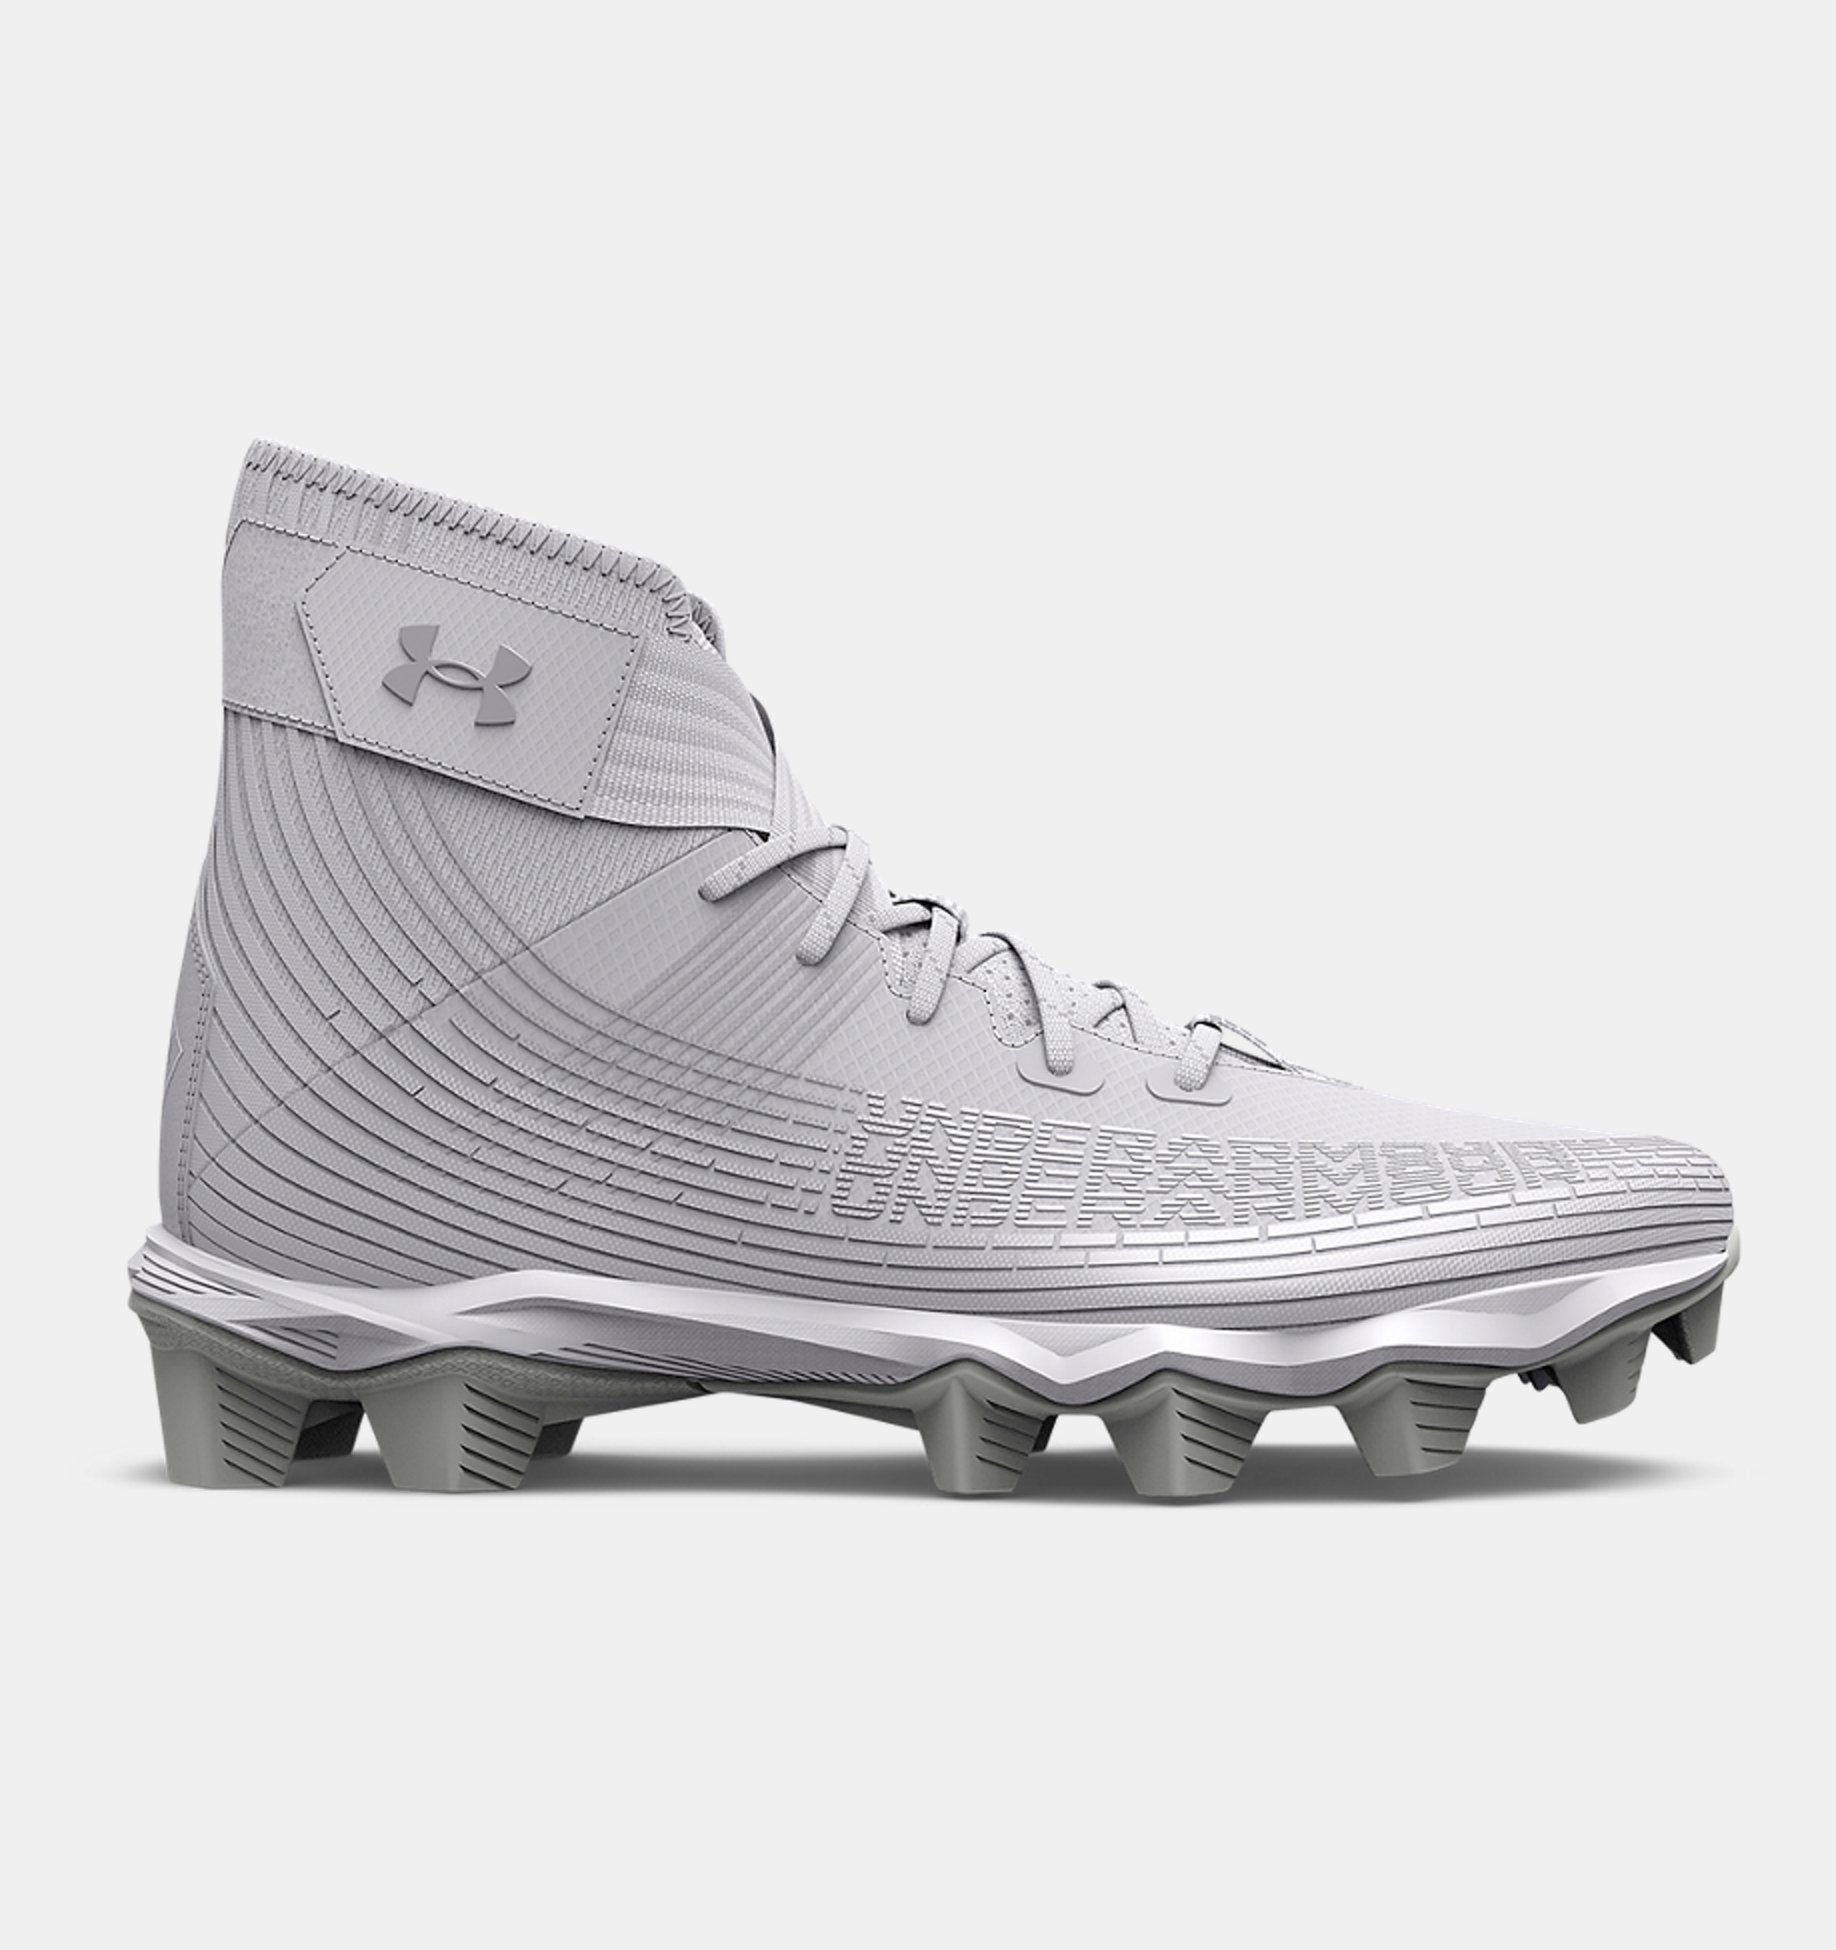 Under Armour Men's Highlight Franchise Footwear Under Armour White/Silver-101 6.5 